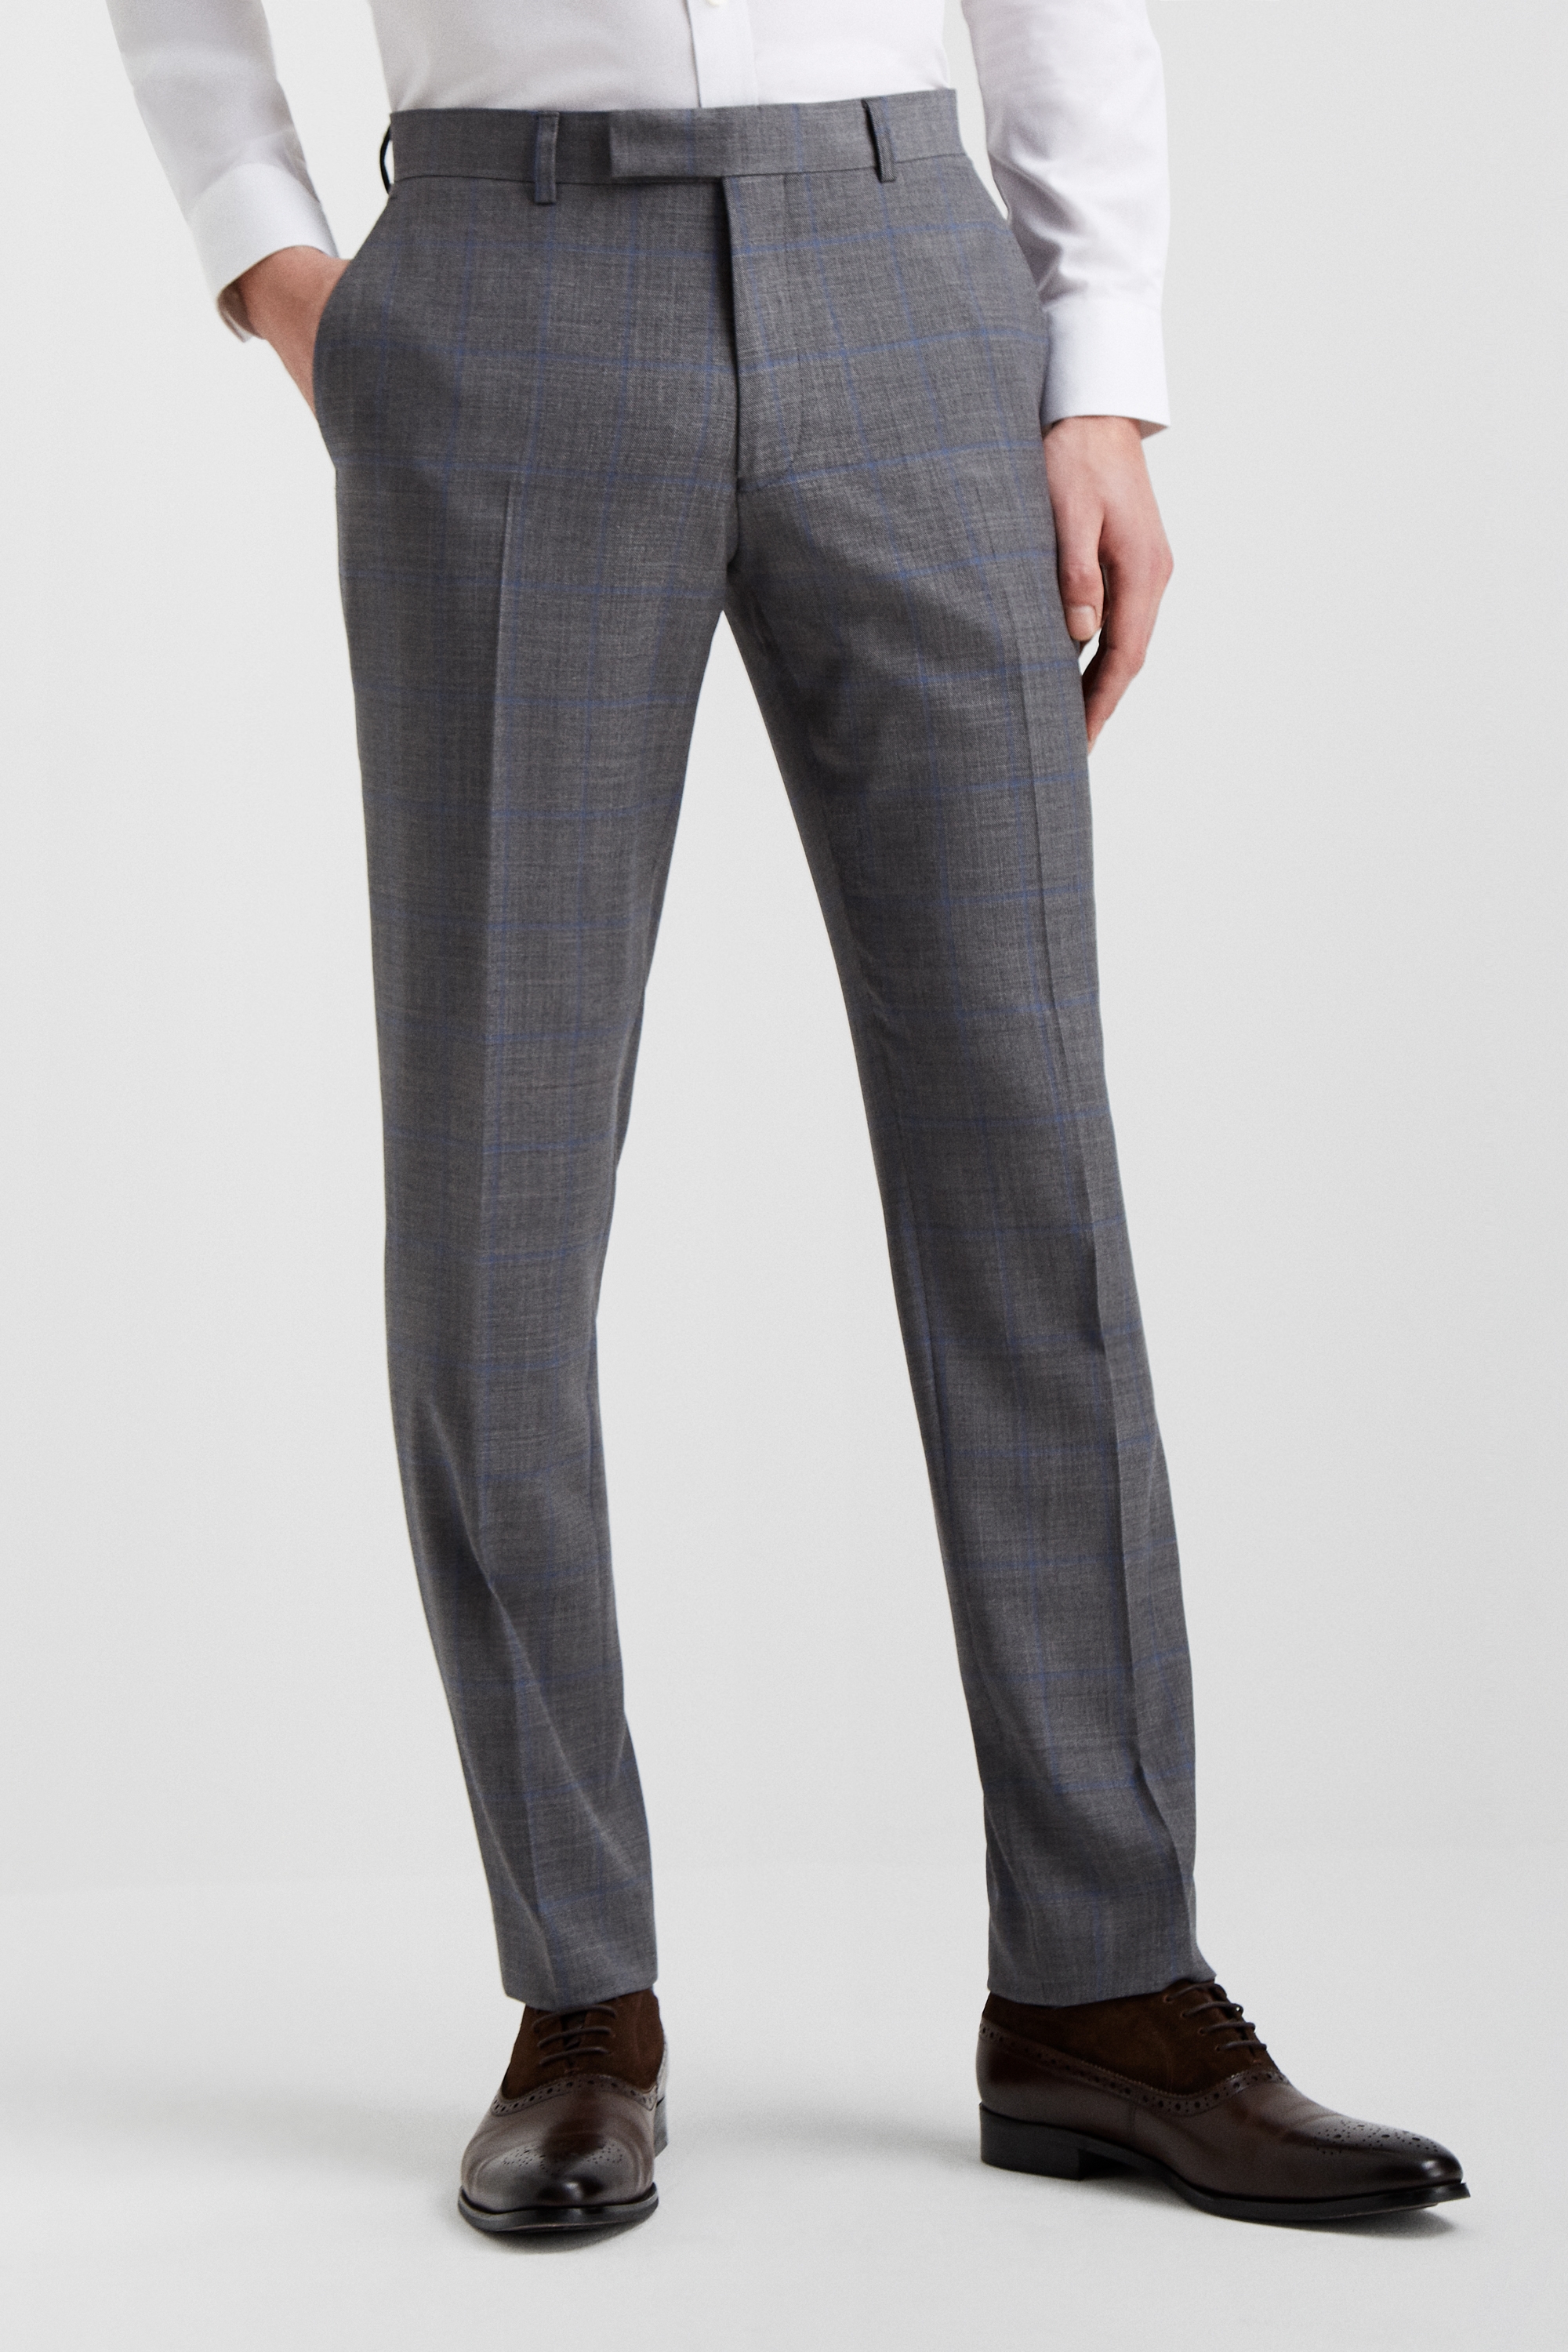 Moss 1851 Tailored Fit Grey with Blue Windowpane Trousers